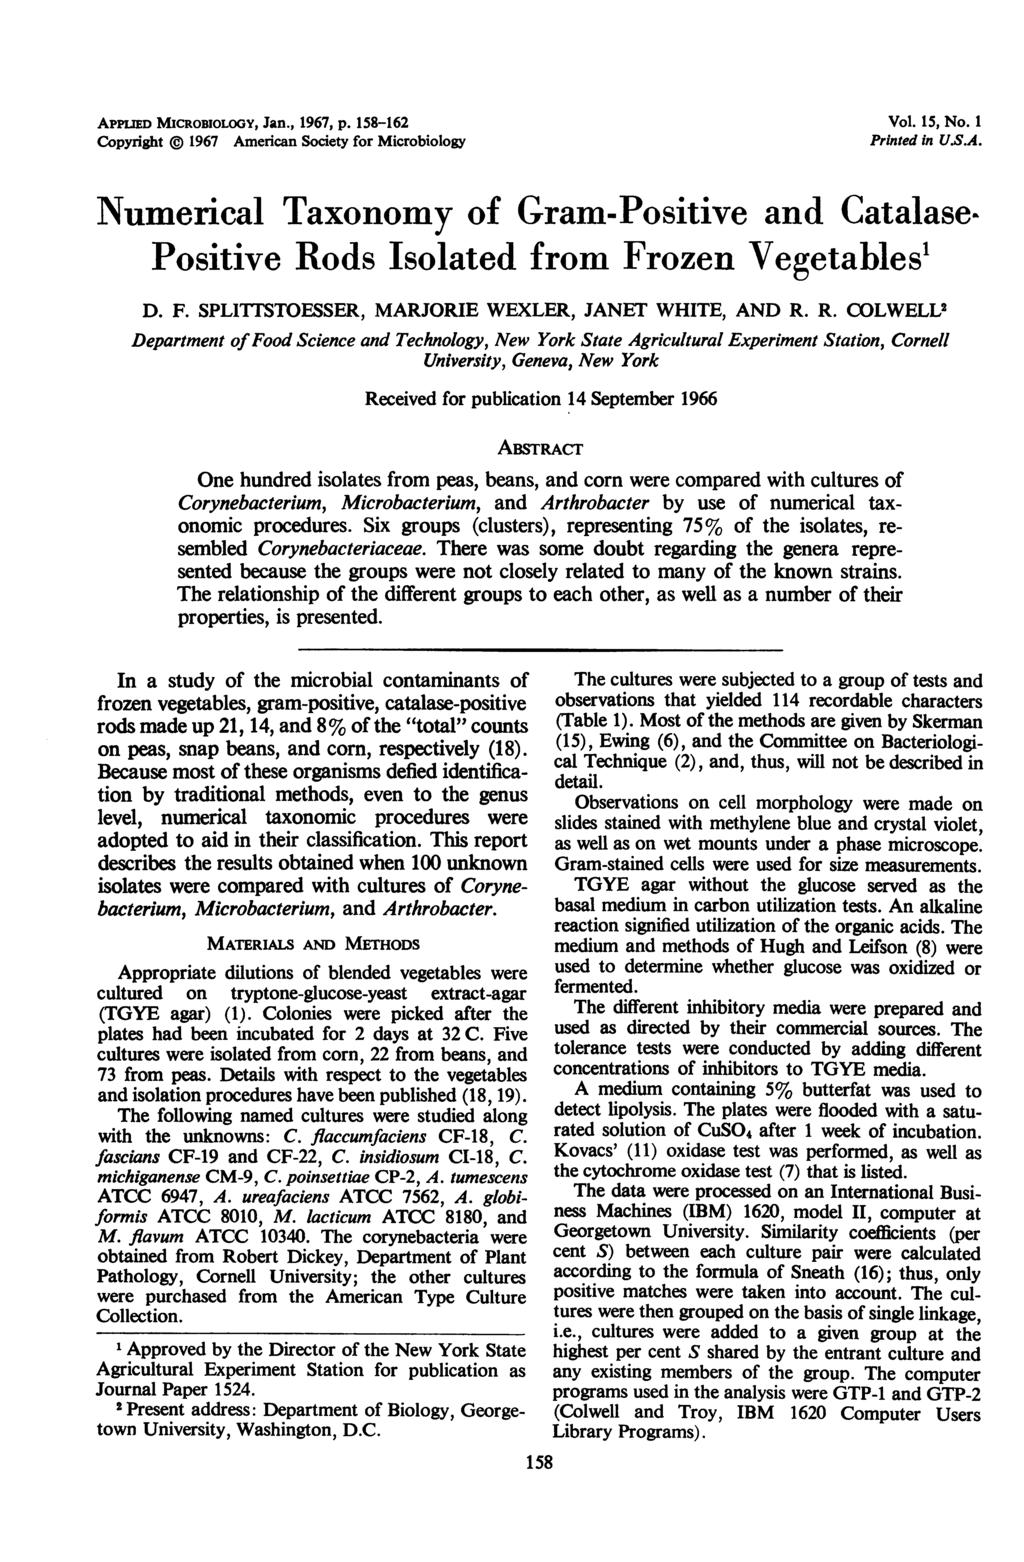 APPLED MCROBOLOGY, Jan., 1967, p. 158-16 Copyright 1967 American Society for Microbiology Vol. 15, No. 1 Printed in U.S.A. Numerical Taxonomy of Gram-Positive and Catalase Positive Rods solated from Frozen Vegetables1 D.